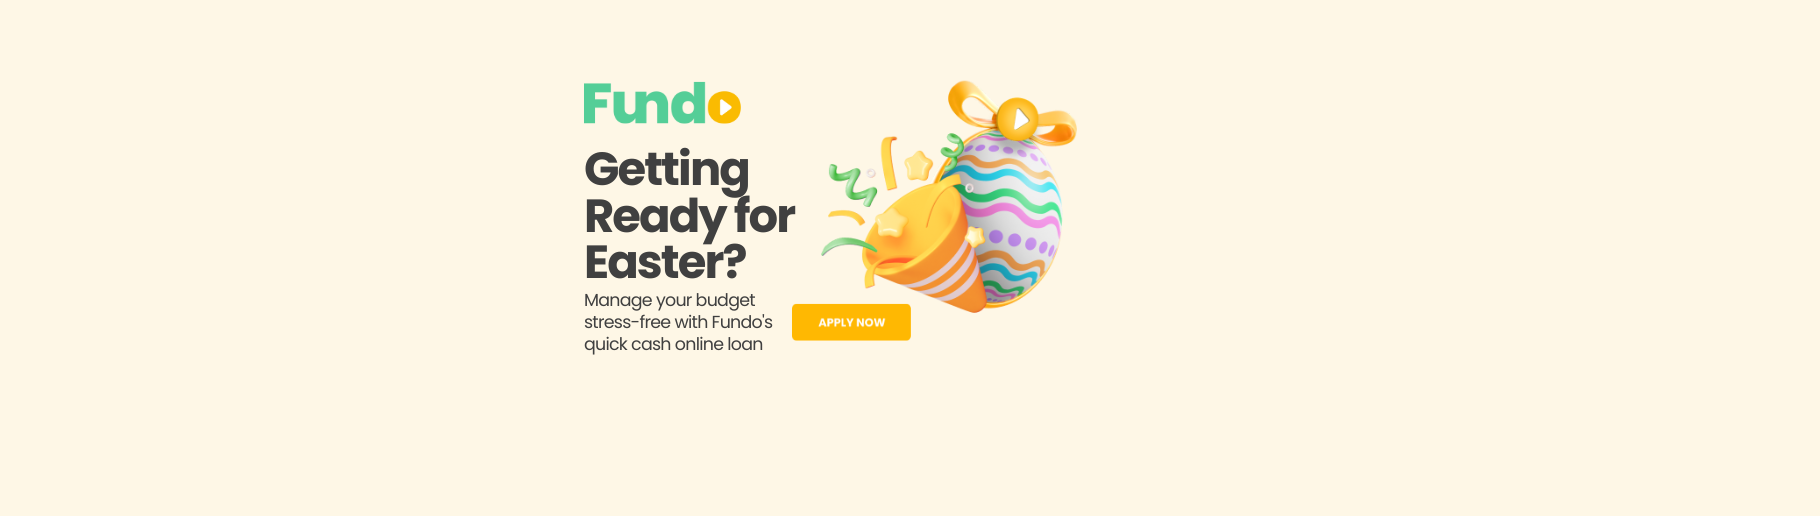 Easter Budgeting Made Easy with Fundo’s Cash Loan Online